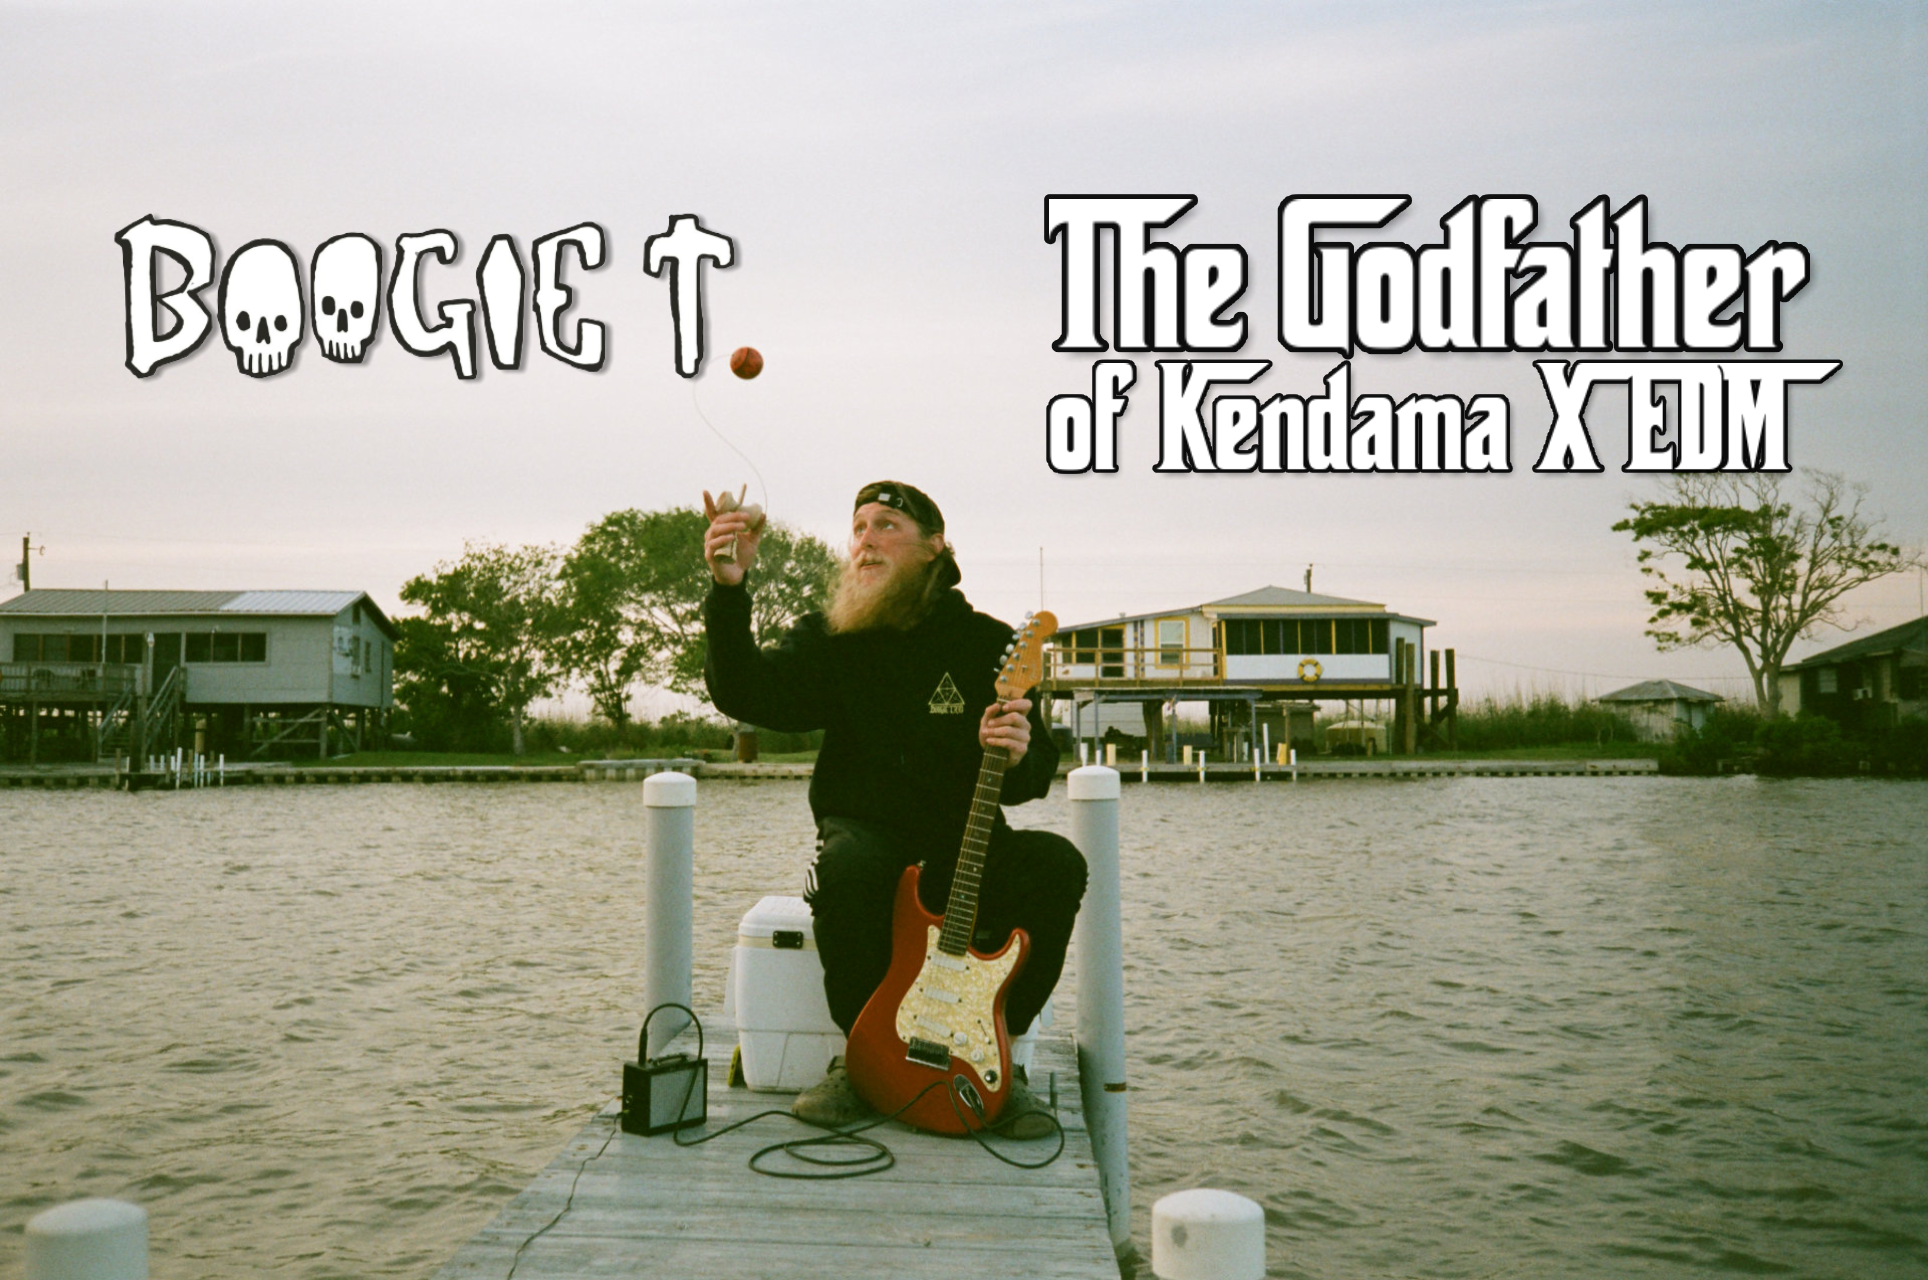 Boogie T - The Godfather of KendamaXEDM - Feature Image